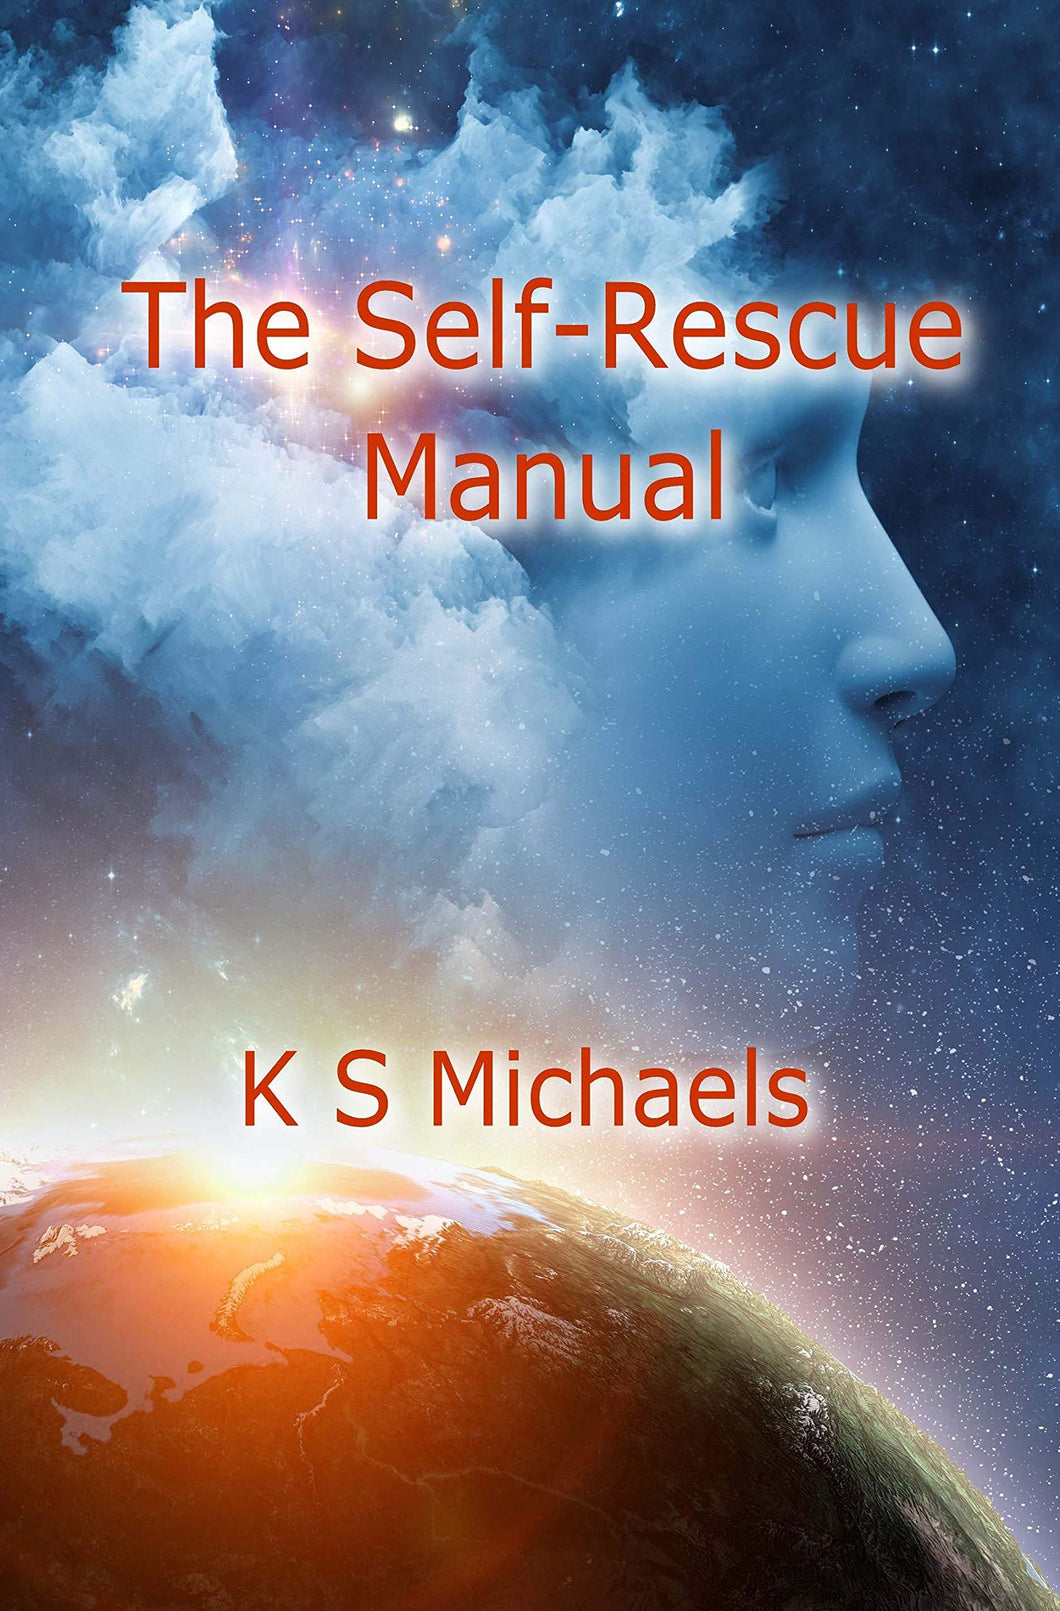 The Self-Rescue Manual - Starry Night Publishing